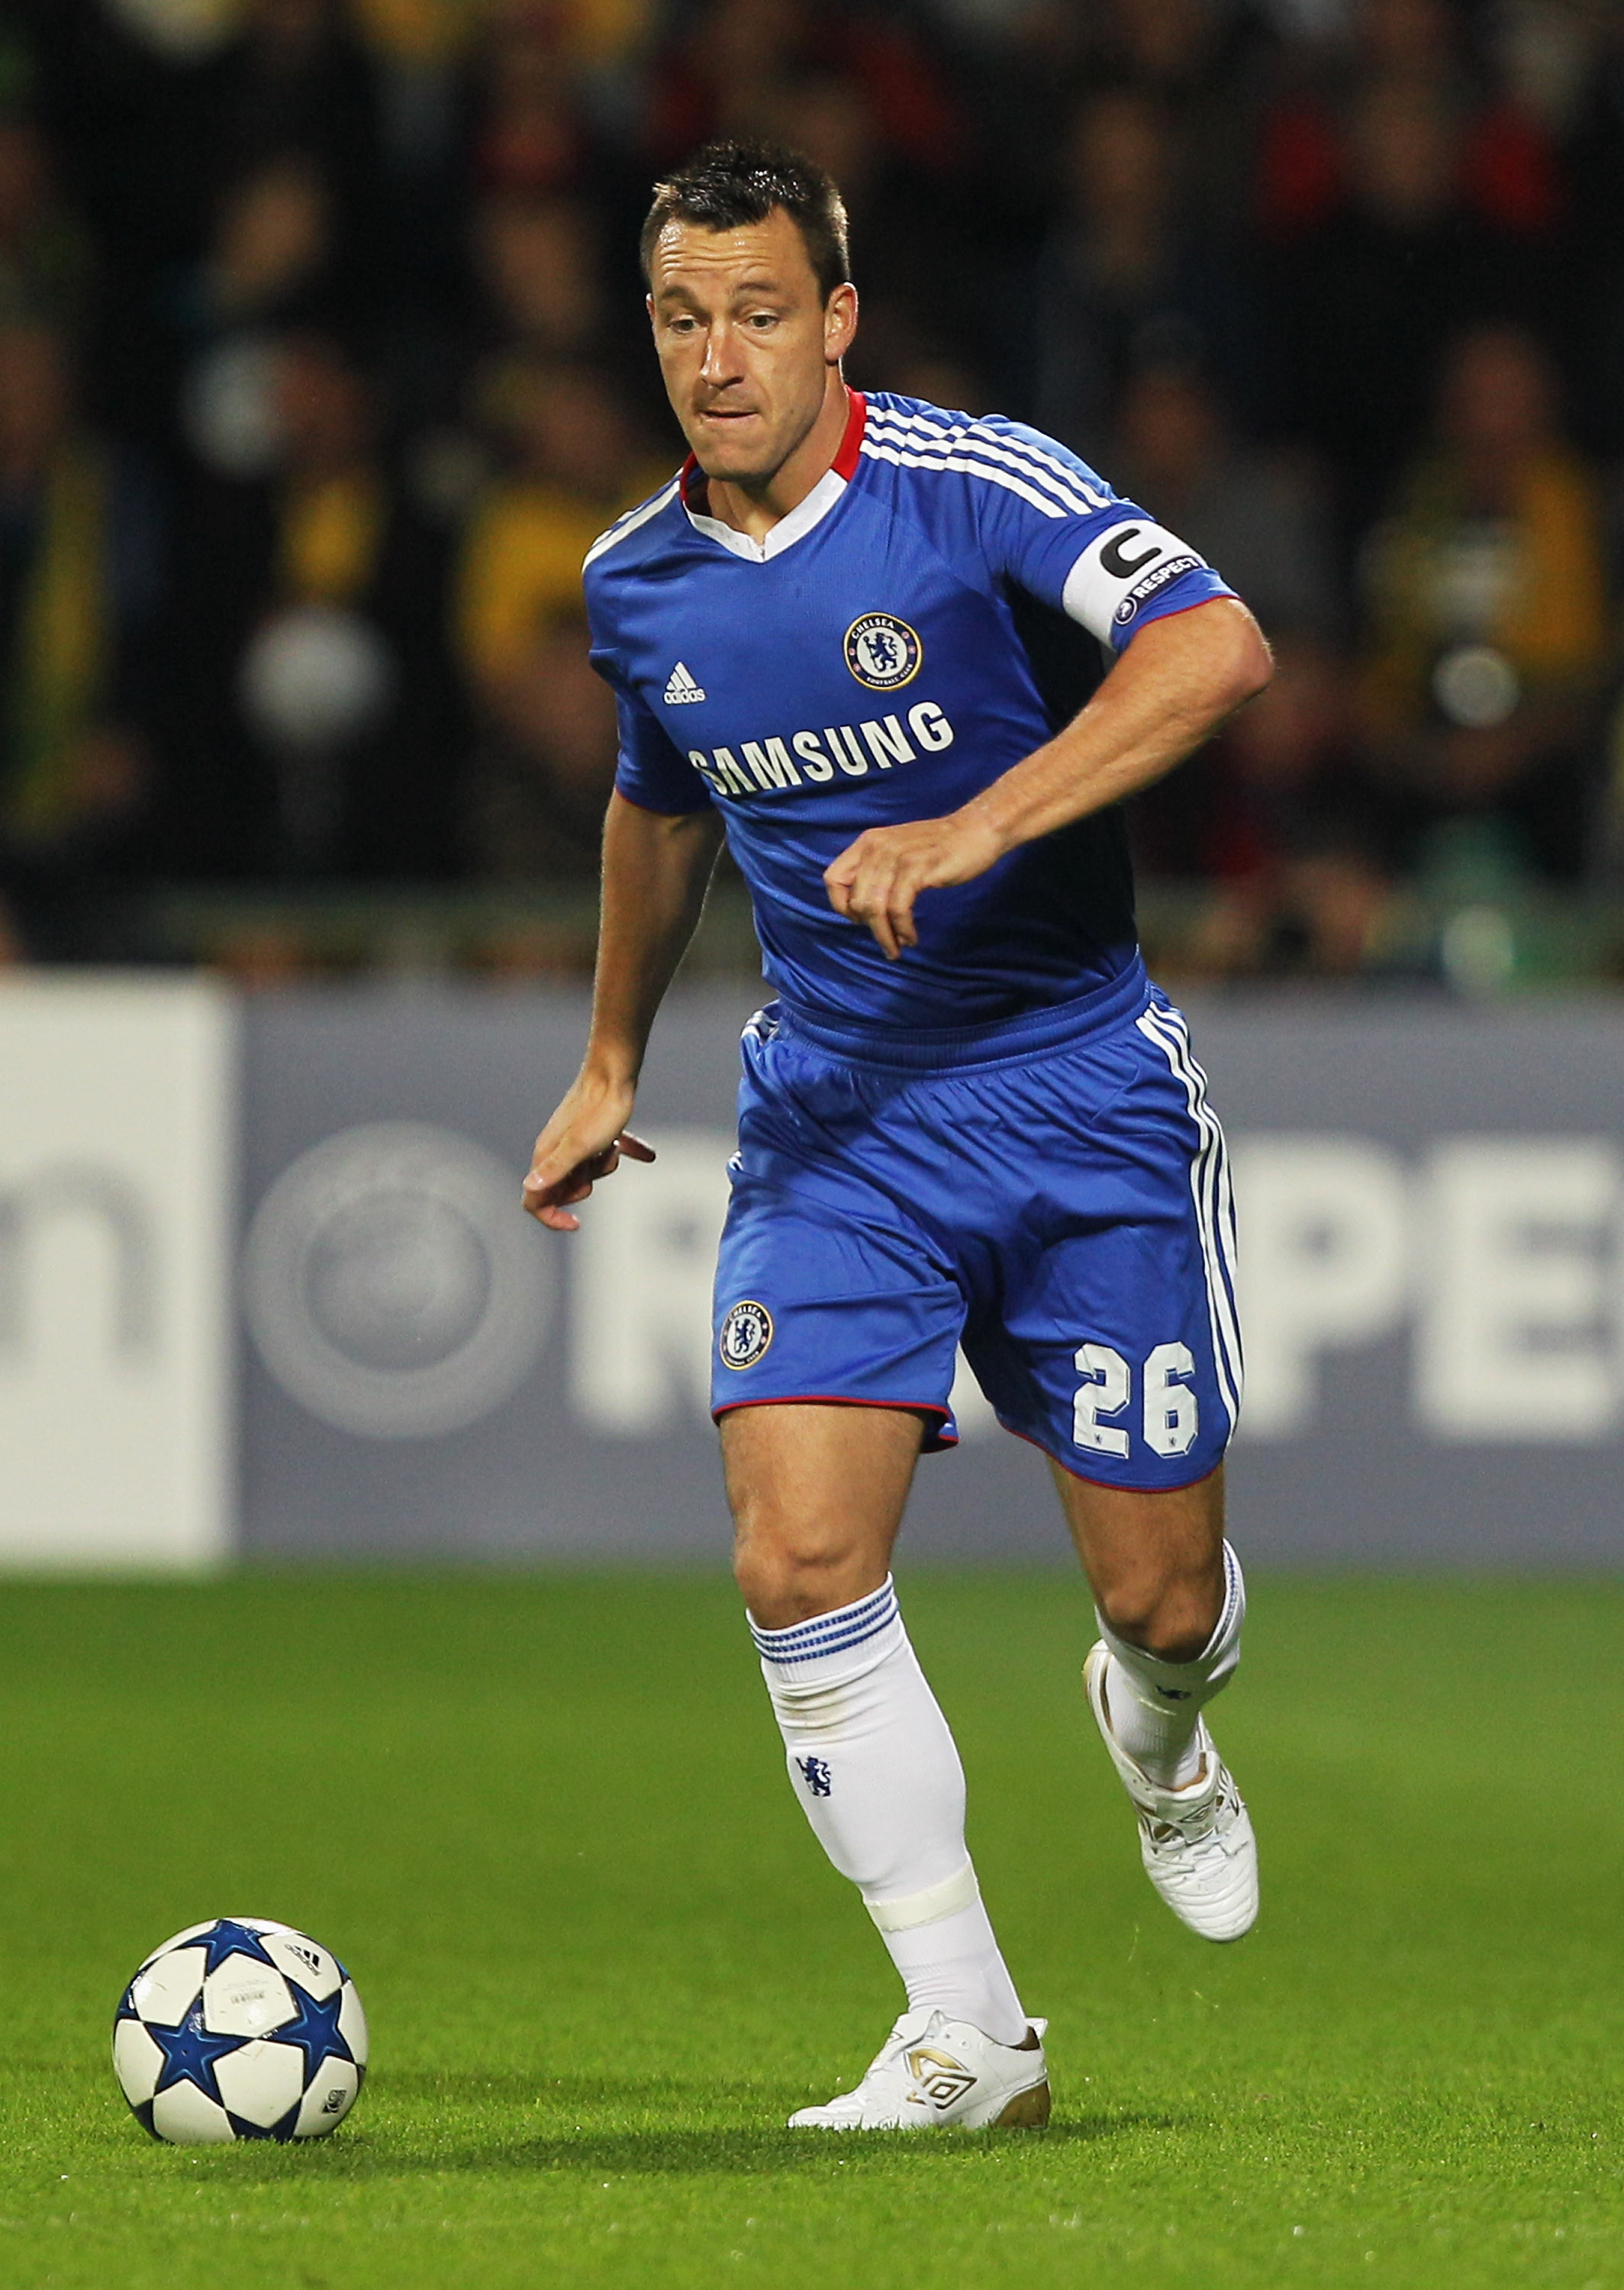 ZILINA, SLOVAKIA - SEPTEMBER 15:  John Terry of Chelsea in action during the UEFA Champions League Group F match between MSK Zilina and Chelsea at the Pod Dubnom Stadium on September 15, 2010 in Zilina, Slovakia.  (Photo by Hamish Blair/Getty Images)